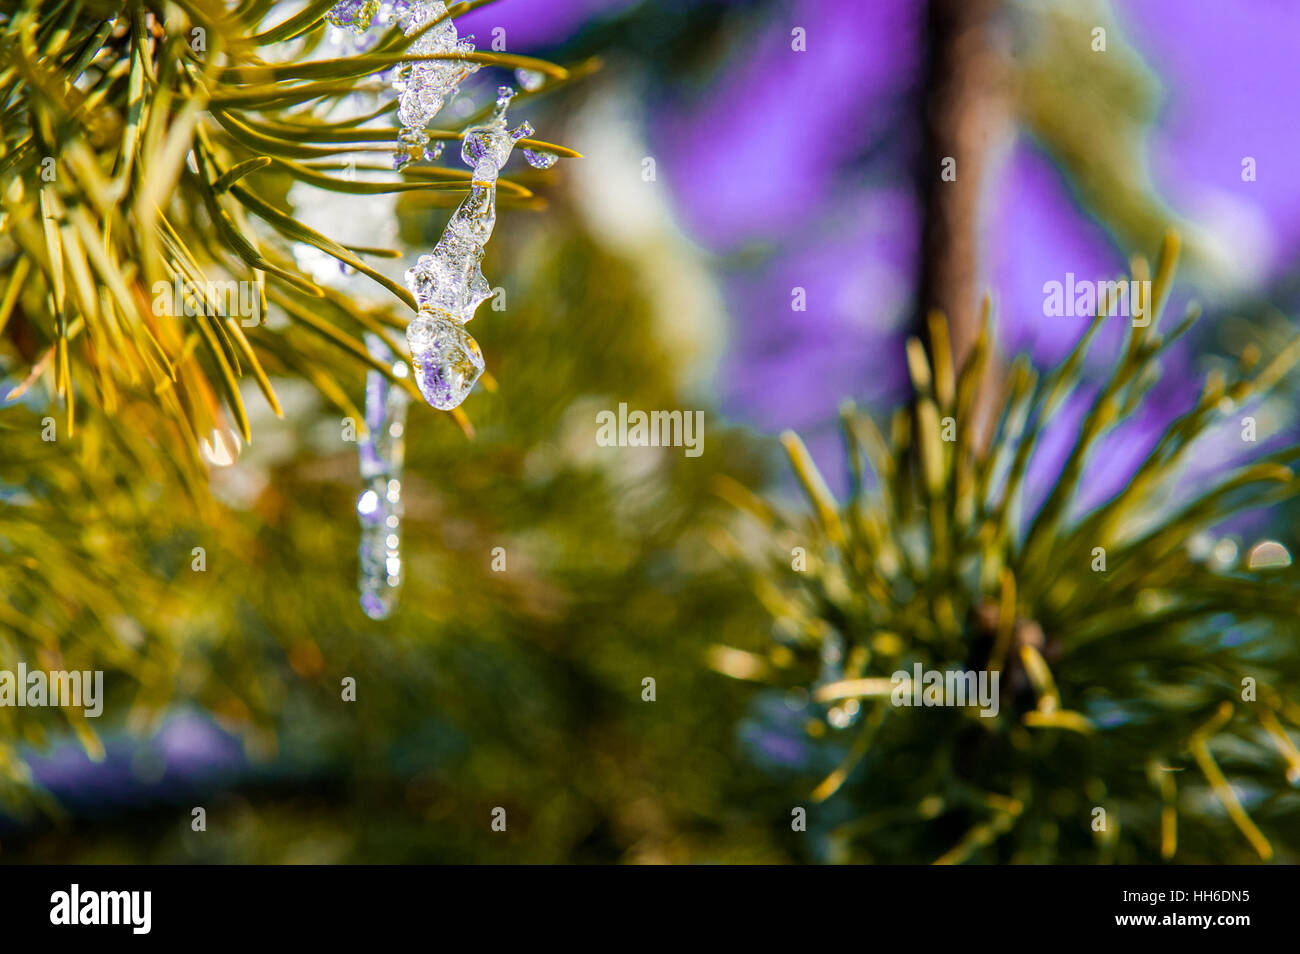 View of pine branch with snow and icicle Stock Photo